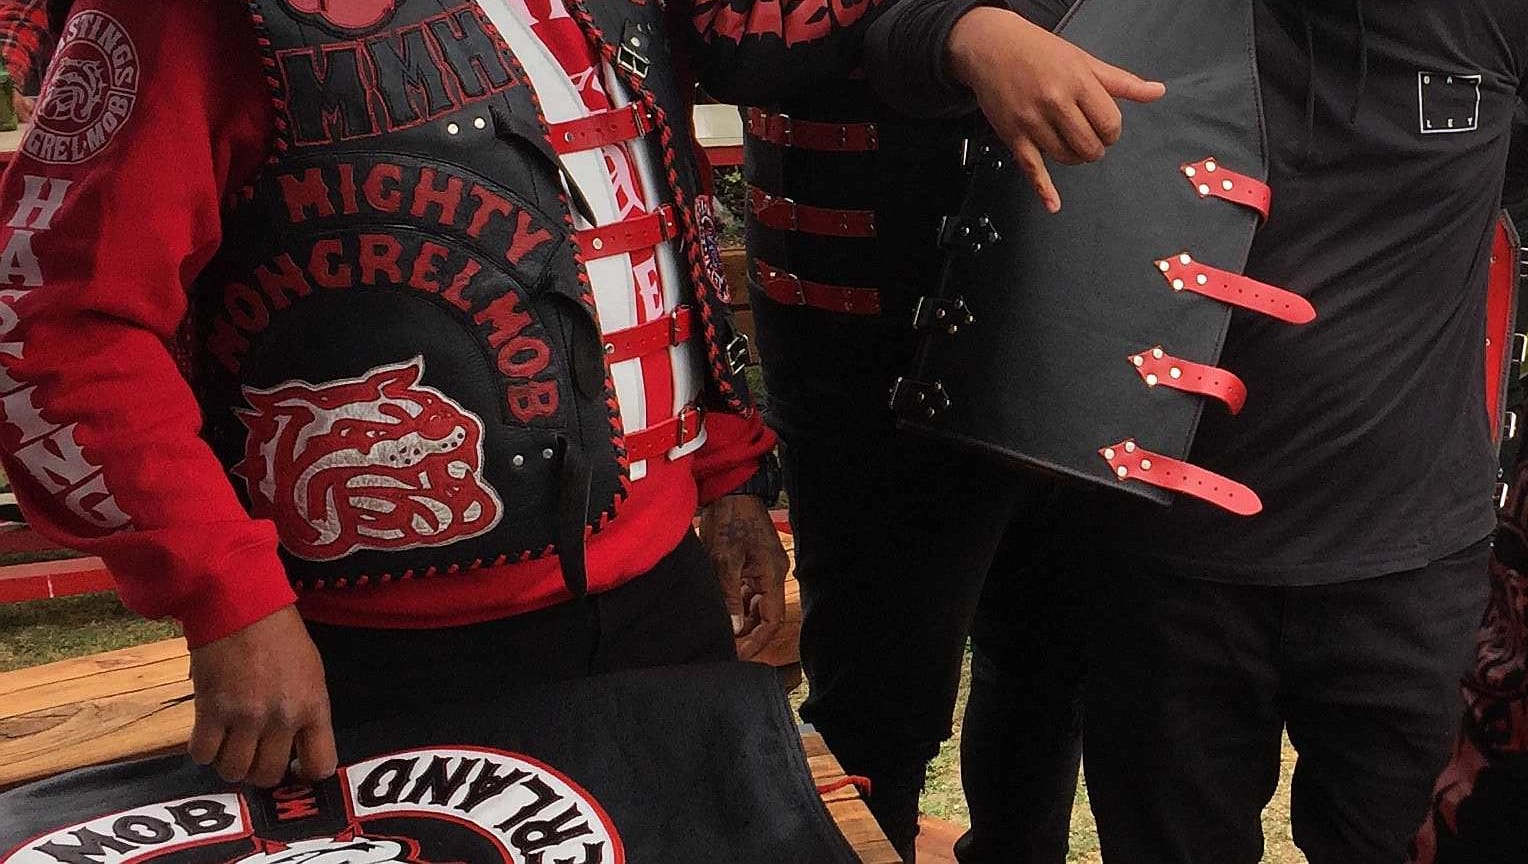 Mongrel mob member puts on patch for the first time.